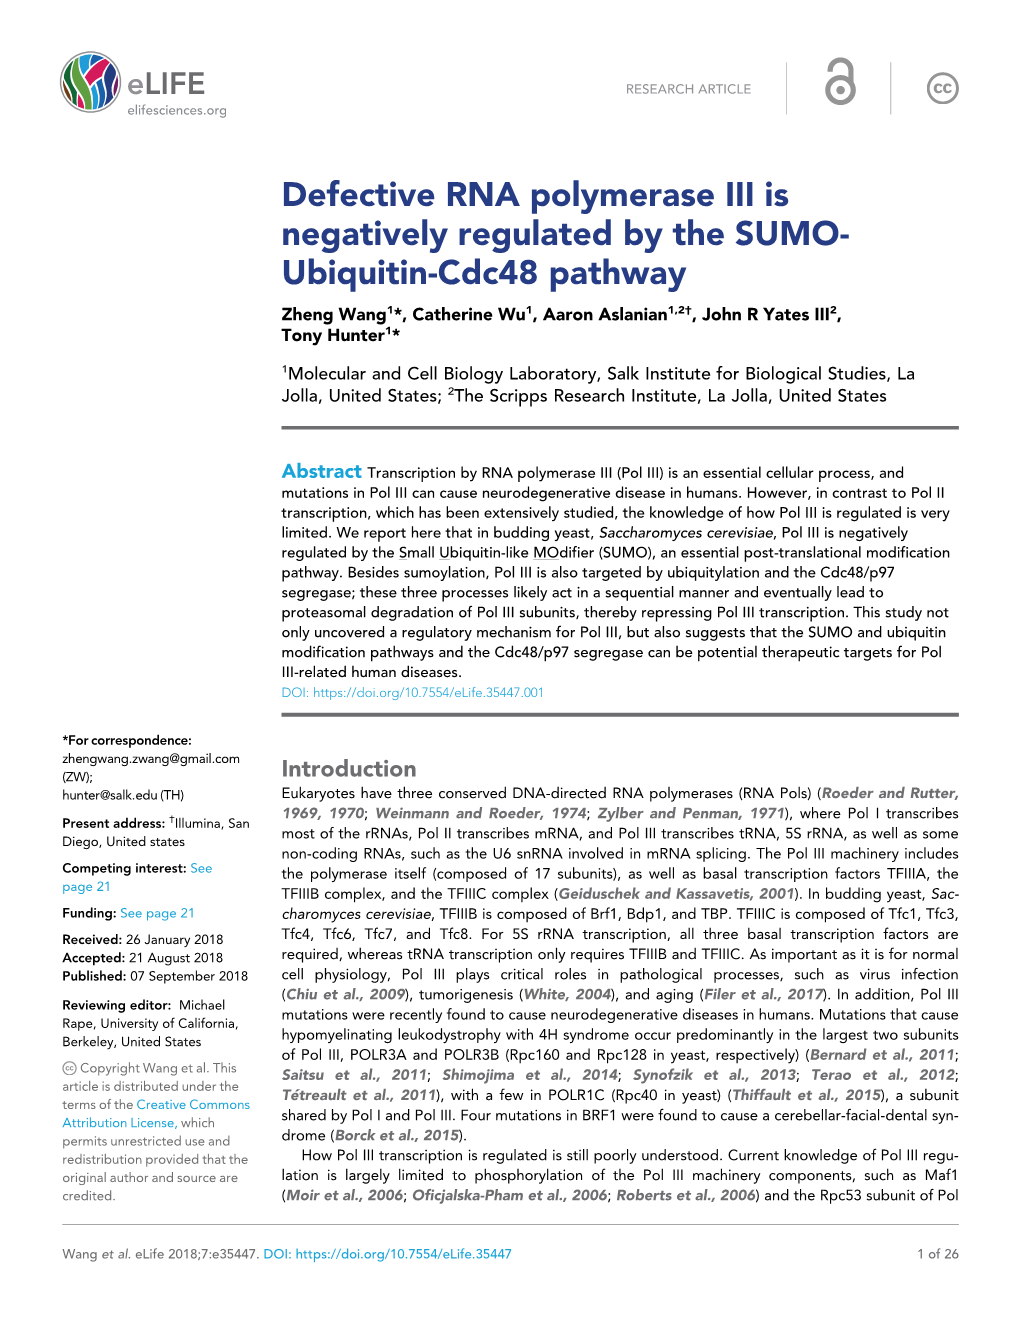 Defective RNA Polymerase III Is Negatively Regulated by the SUMO